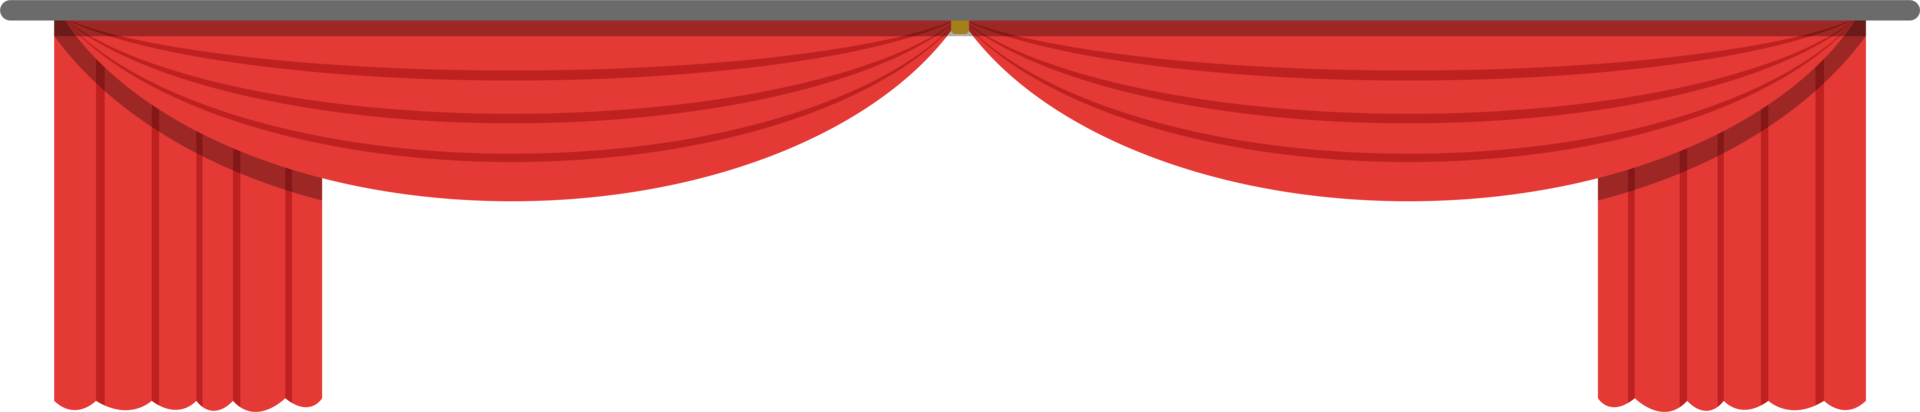 Theater curtain clipart design illustration png